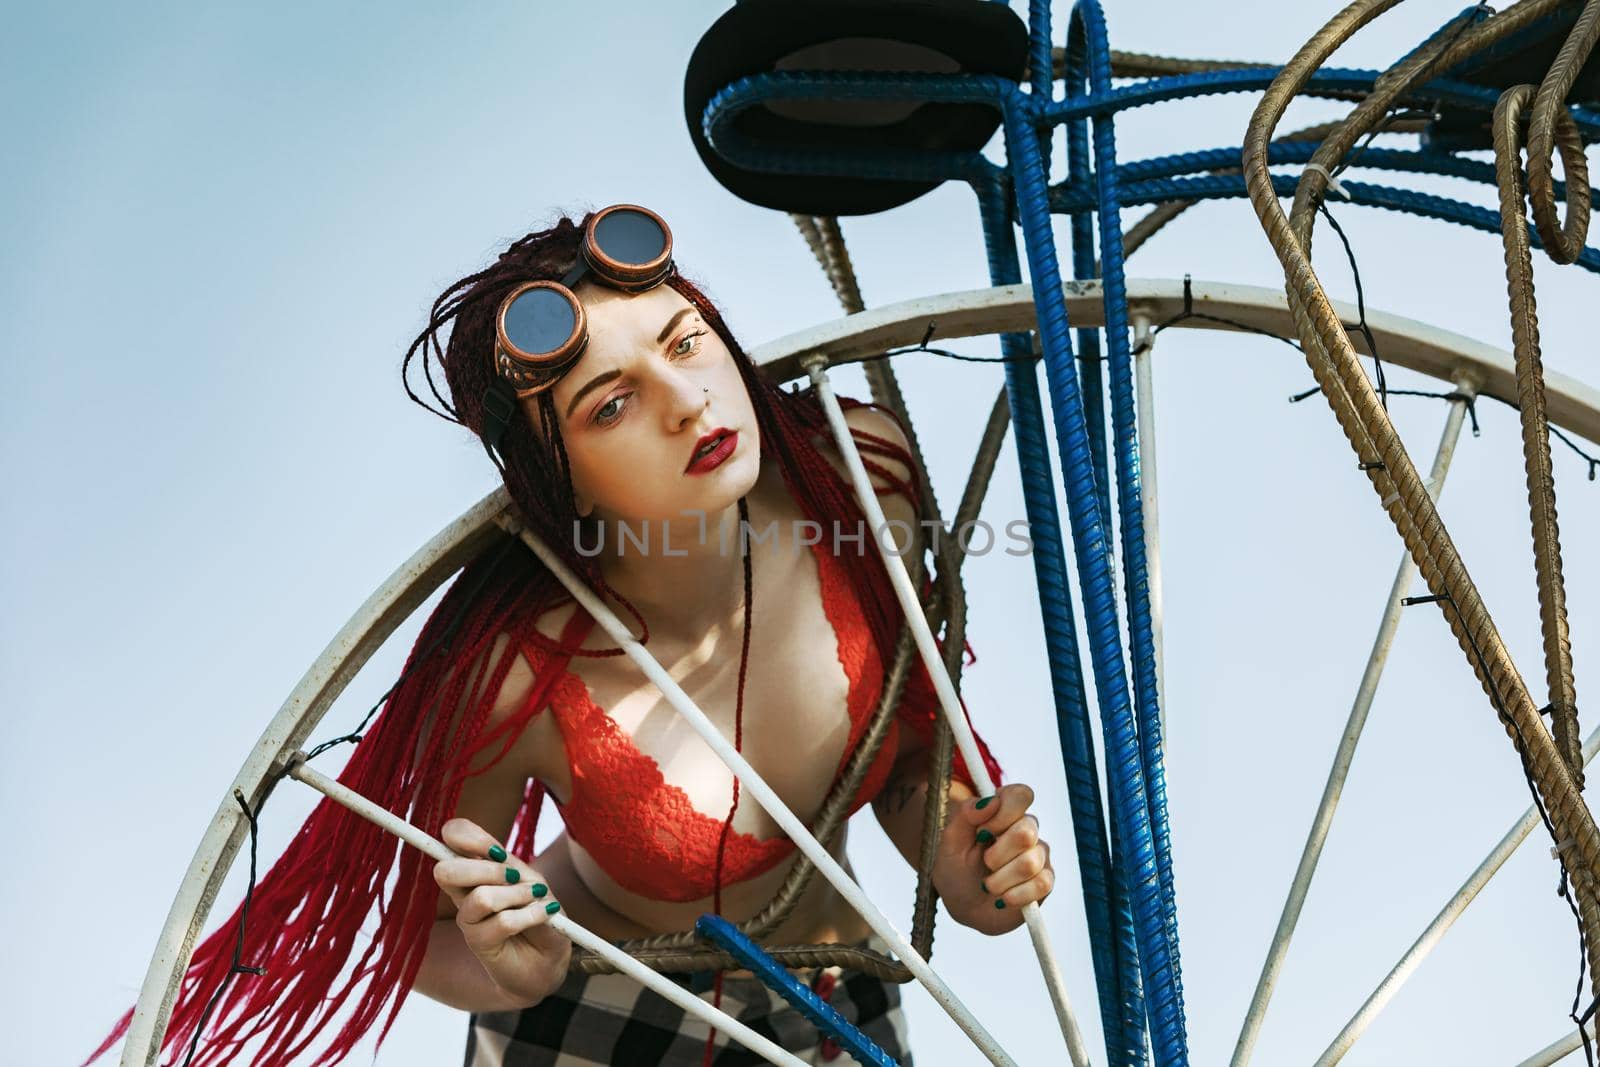 Glamorous girl with scarlet dreadlocks, a red swimsuit, black hat and welding glasses poses on the blue sky background. Free space for your text